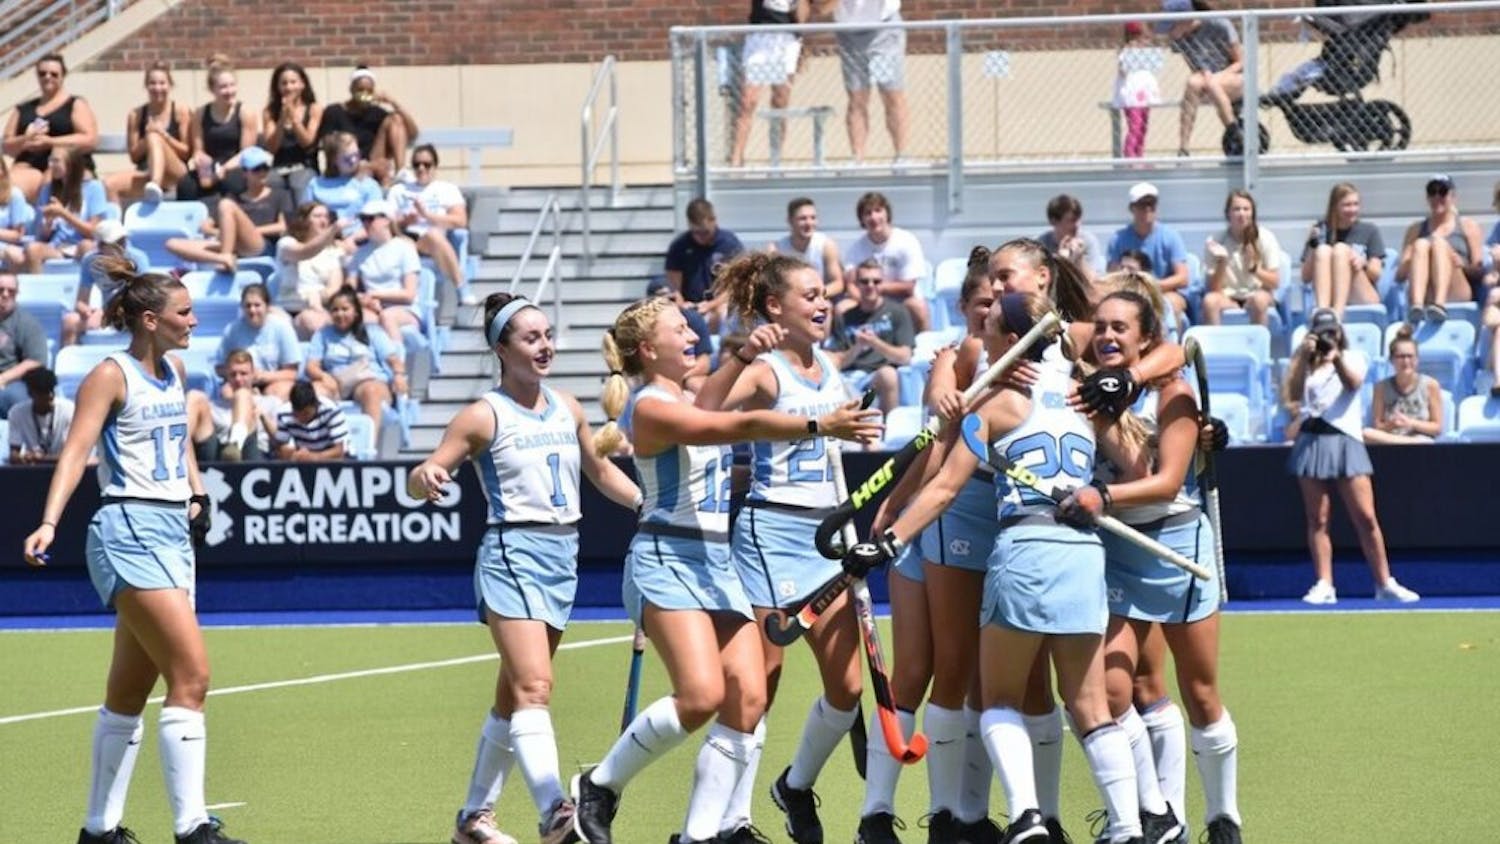 The North Carolina field hockey team celebrates during its 5-1 win against No. 5 Michigan on Aug. 25 at Carolina Field Hockey Stadium.